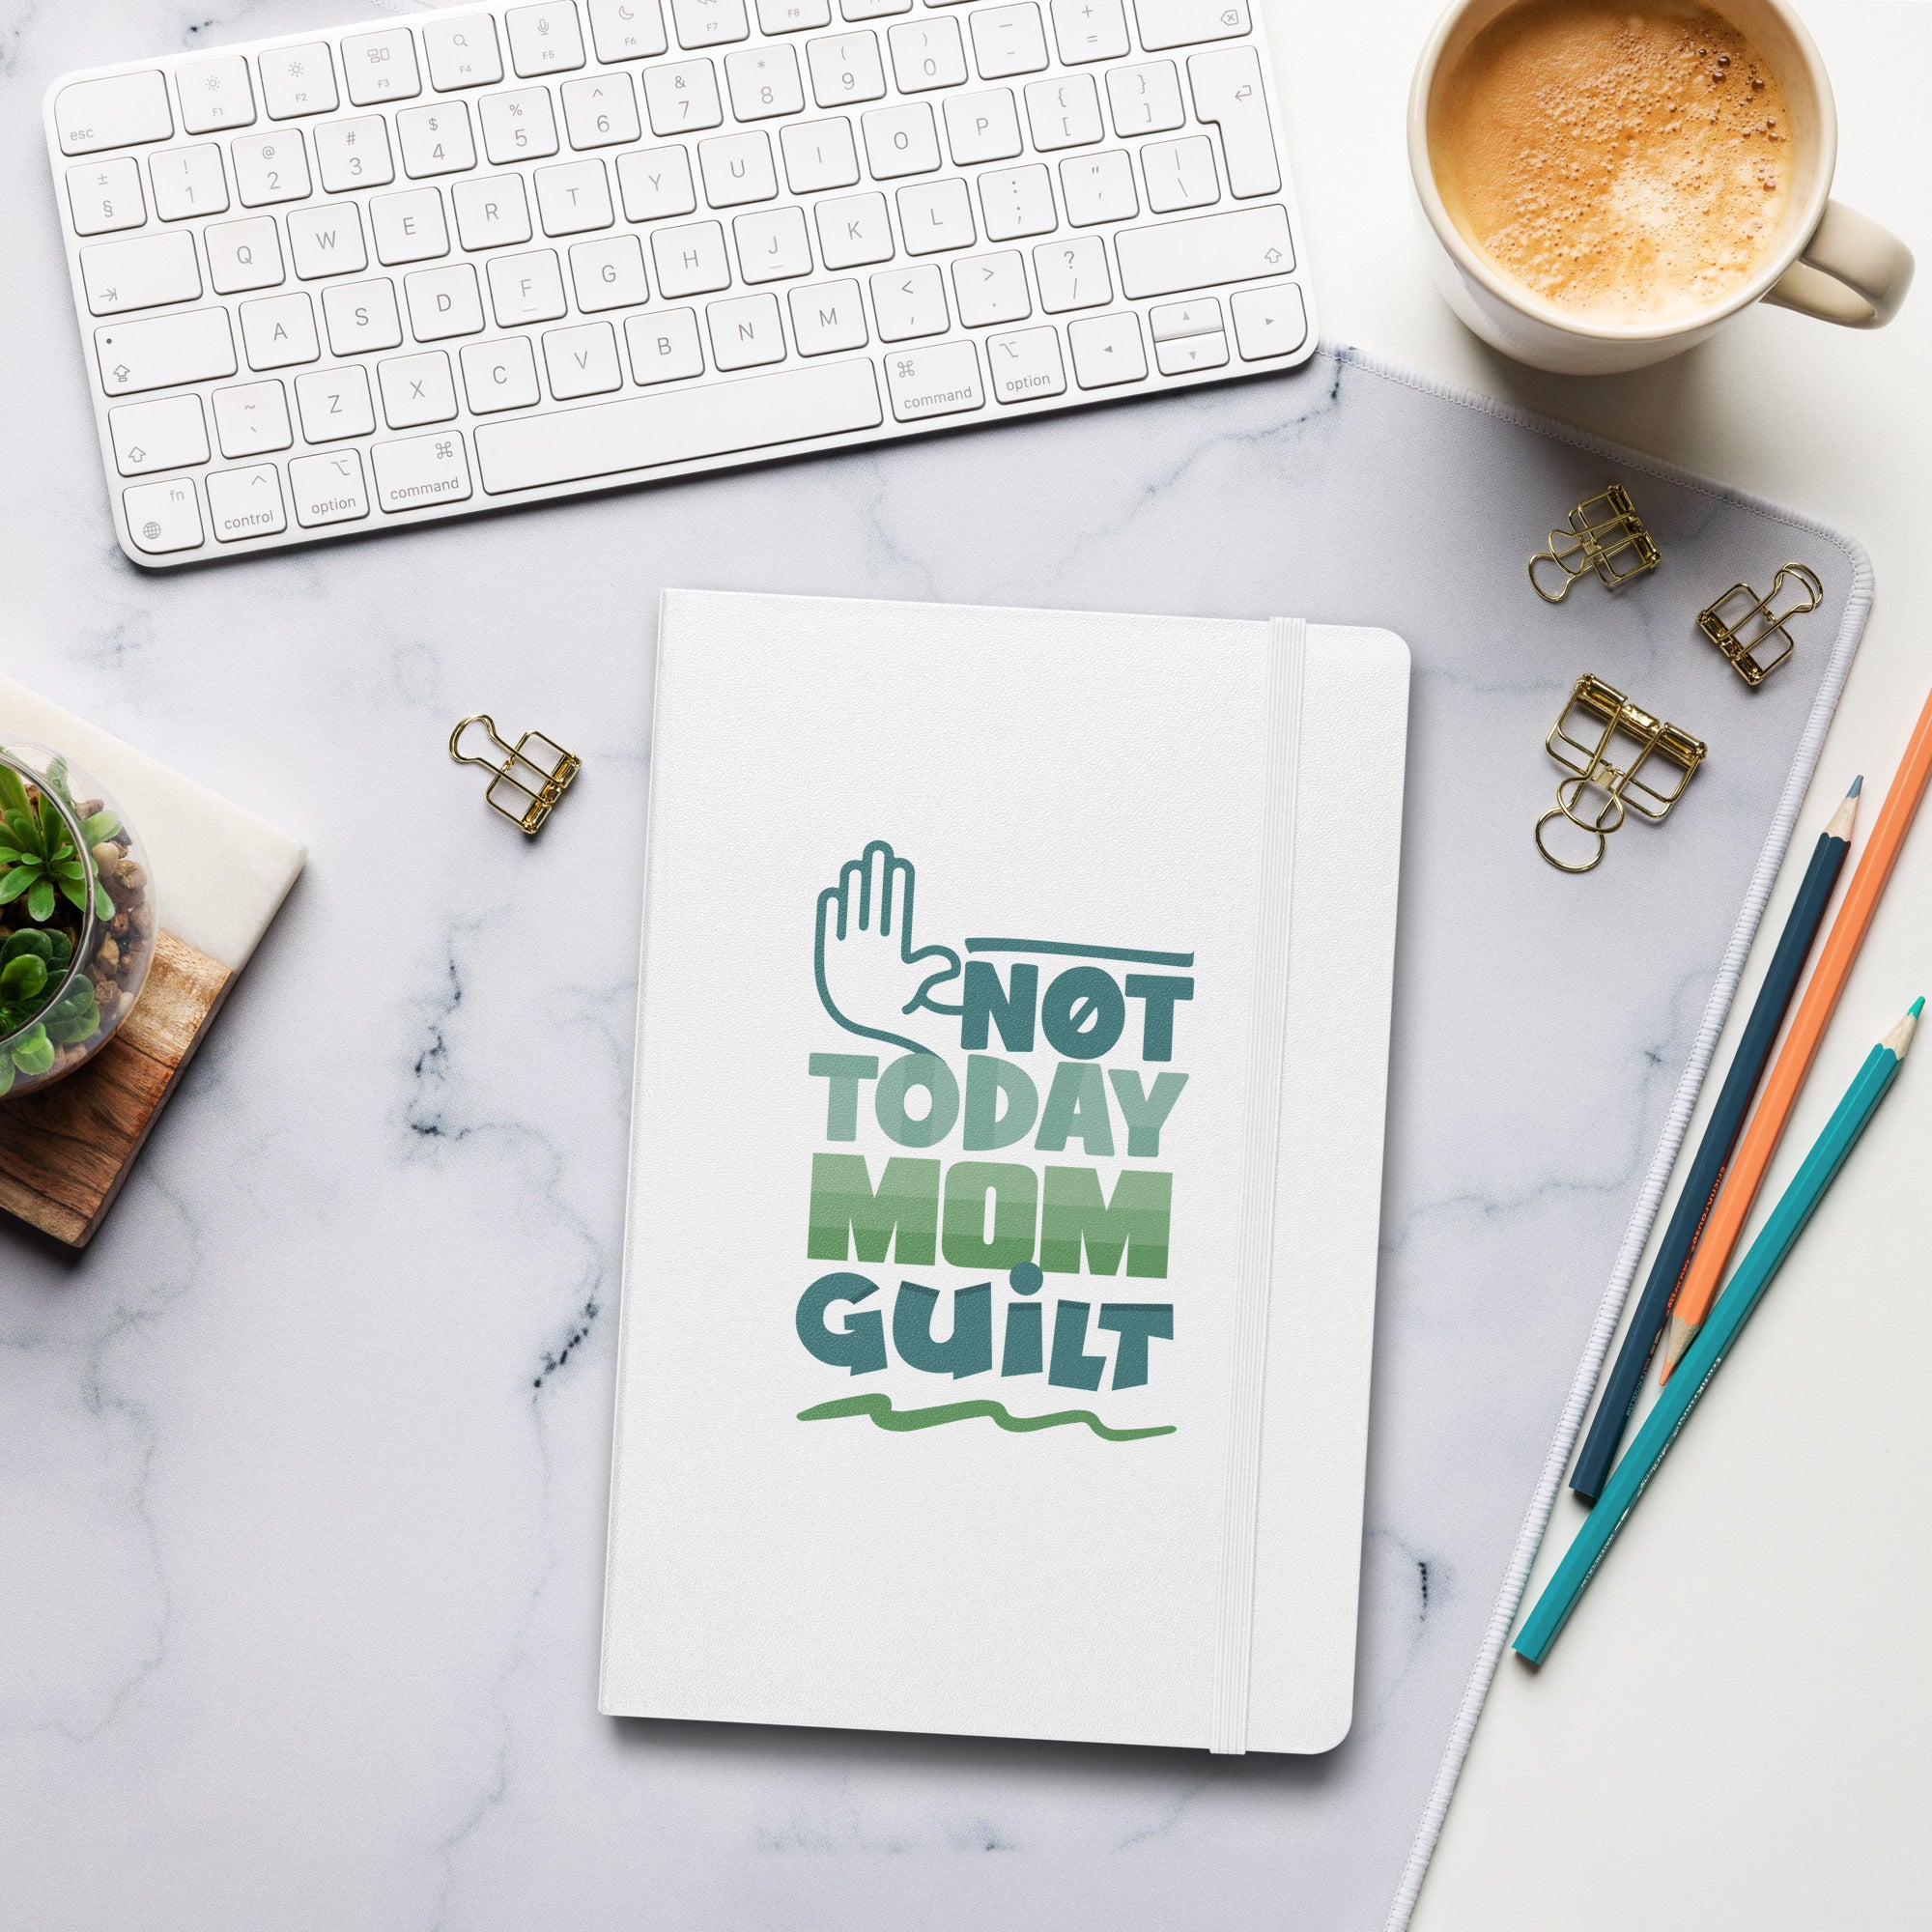 Not today mom guilt hardcover bound notebook